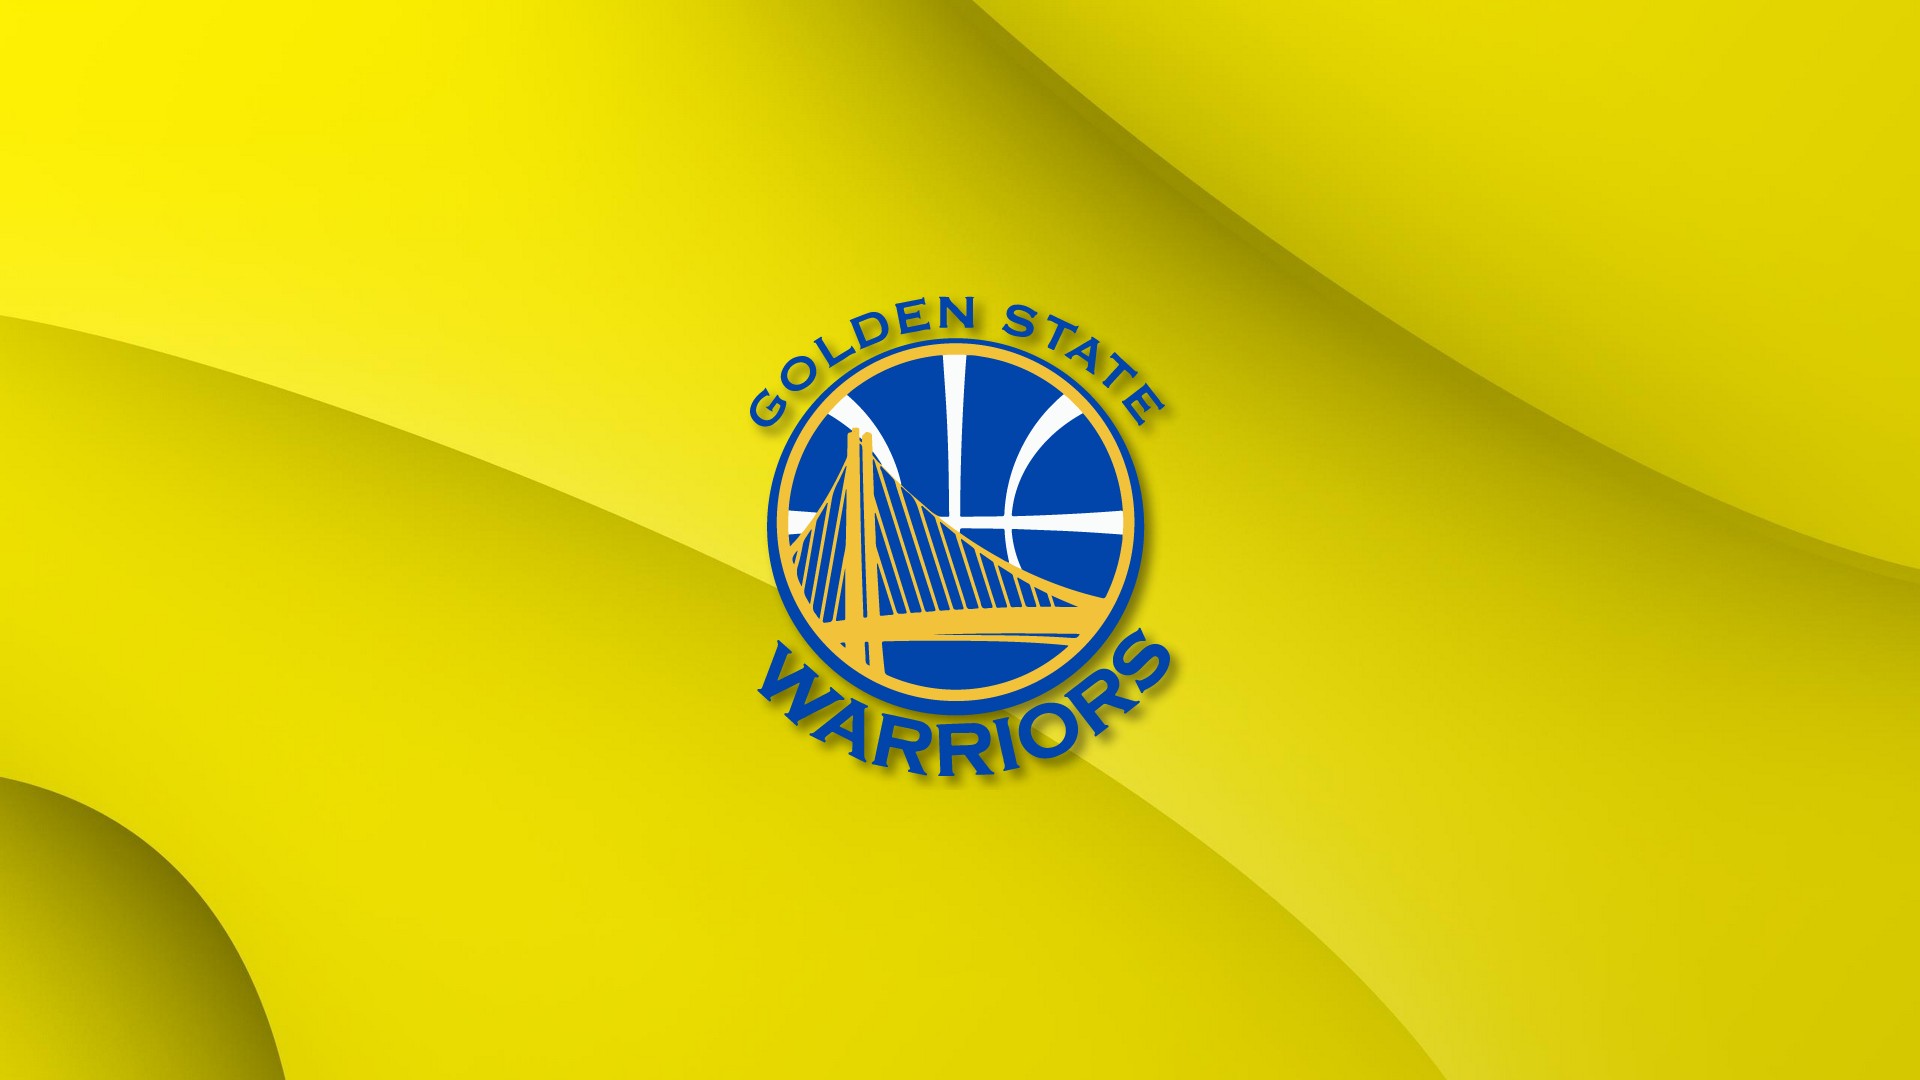 Wallpapers Computer Golden State Warriors with image resolution 1920x1080 pixel. You can make this wallpaper for your Desktop Computer Backgrounds, Mac Wallpapers, Android Lock screen or iPhone Screensavers